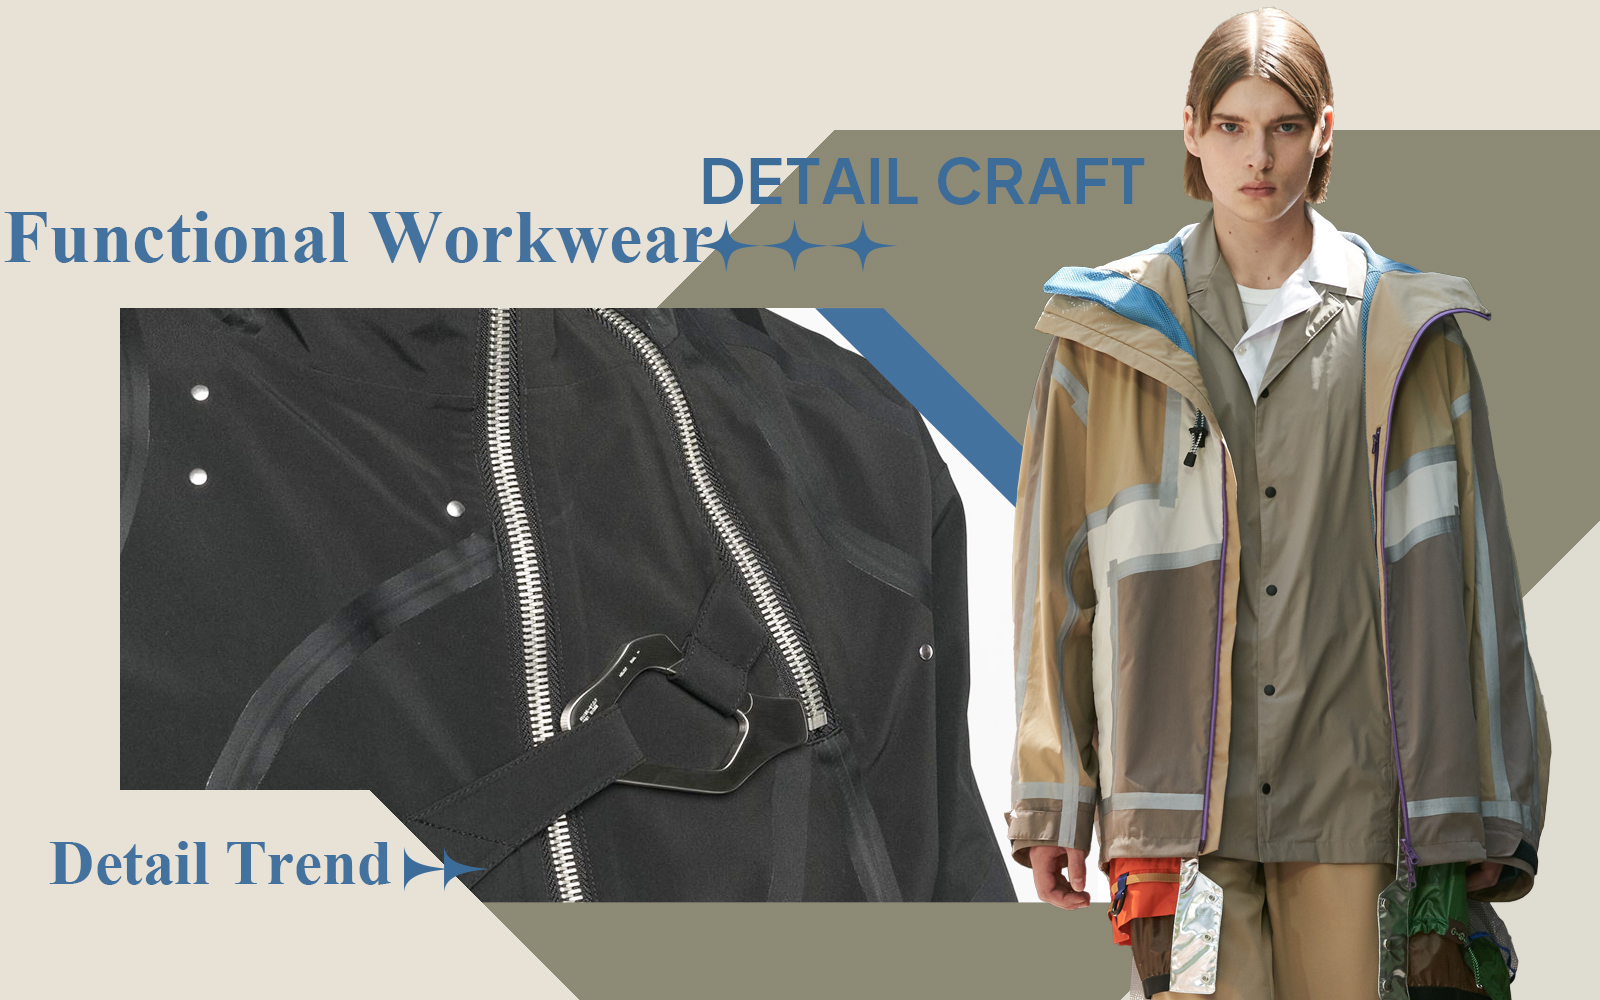 Functional Workwear -- The Detail & Craft Trend for Menswear